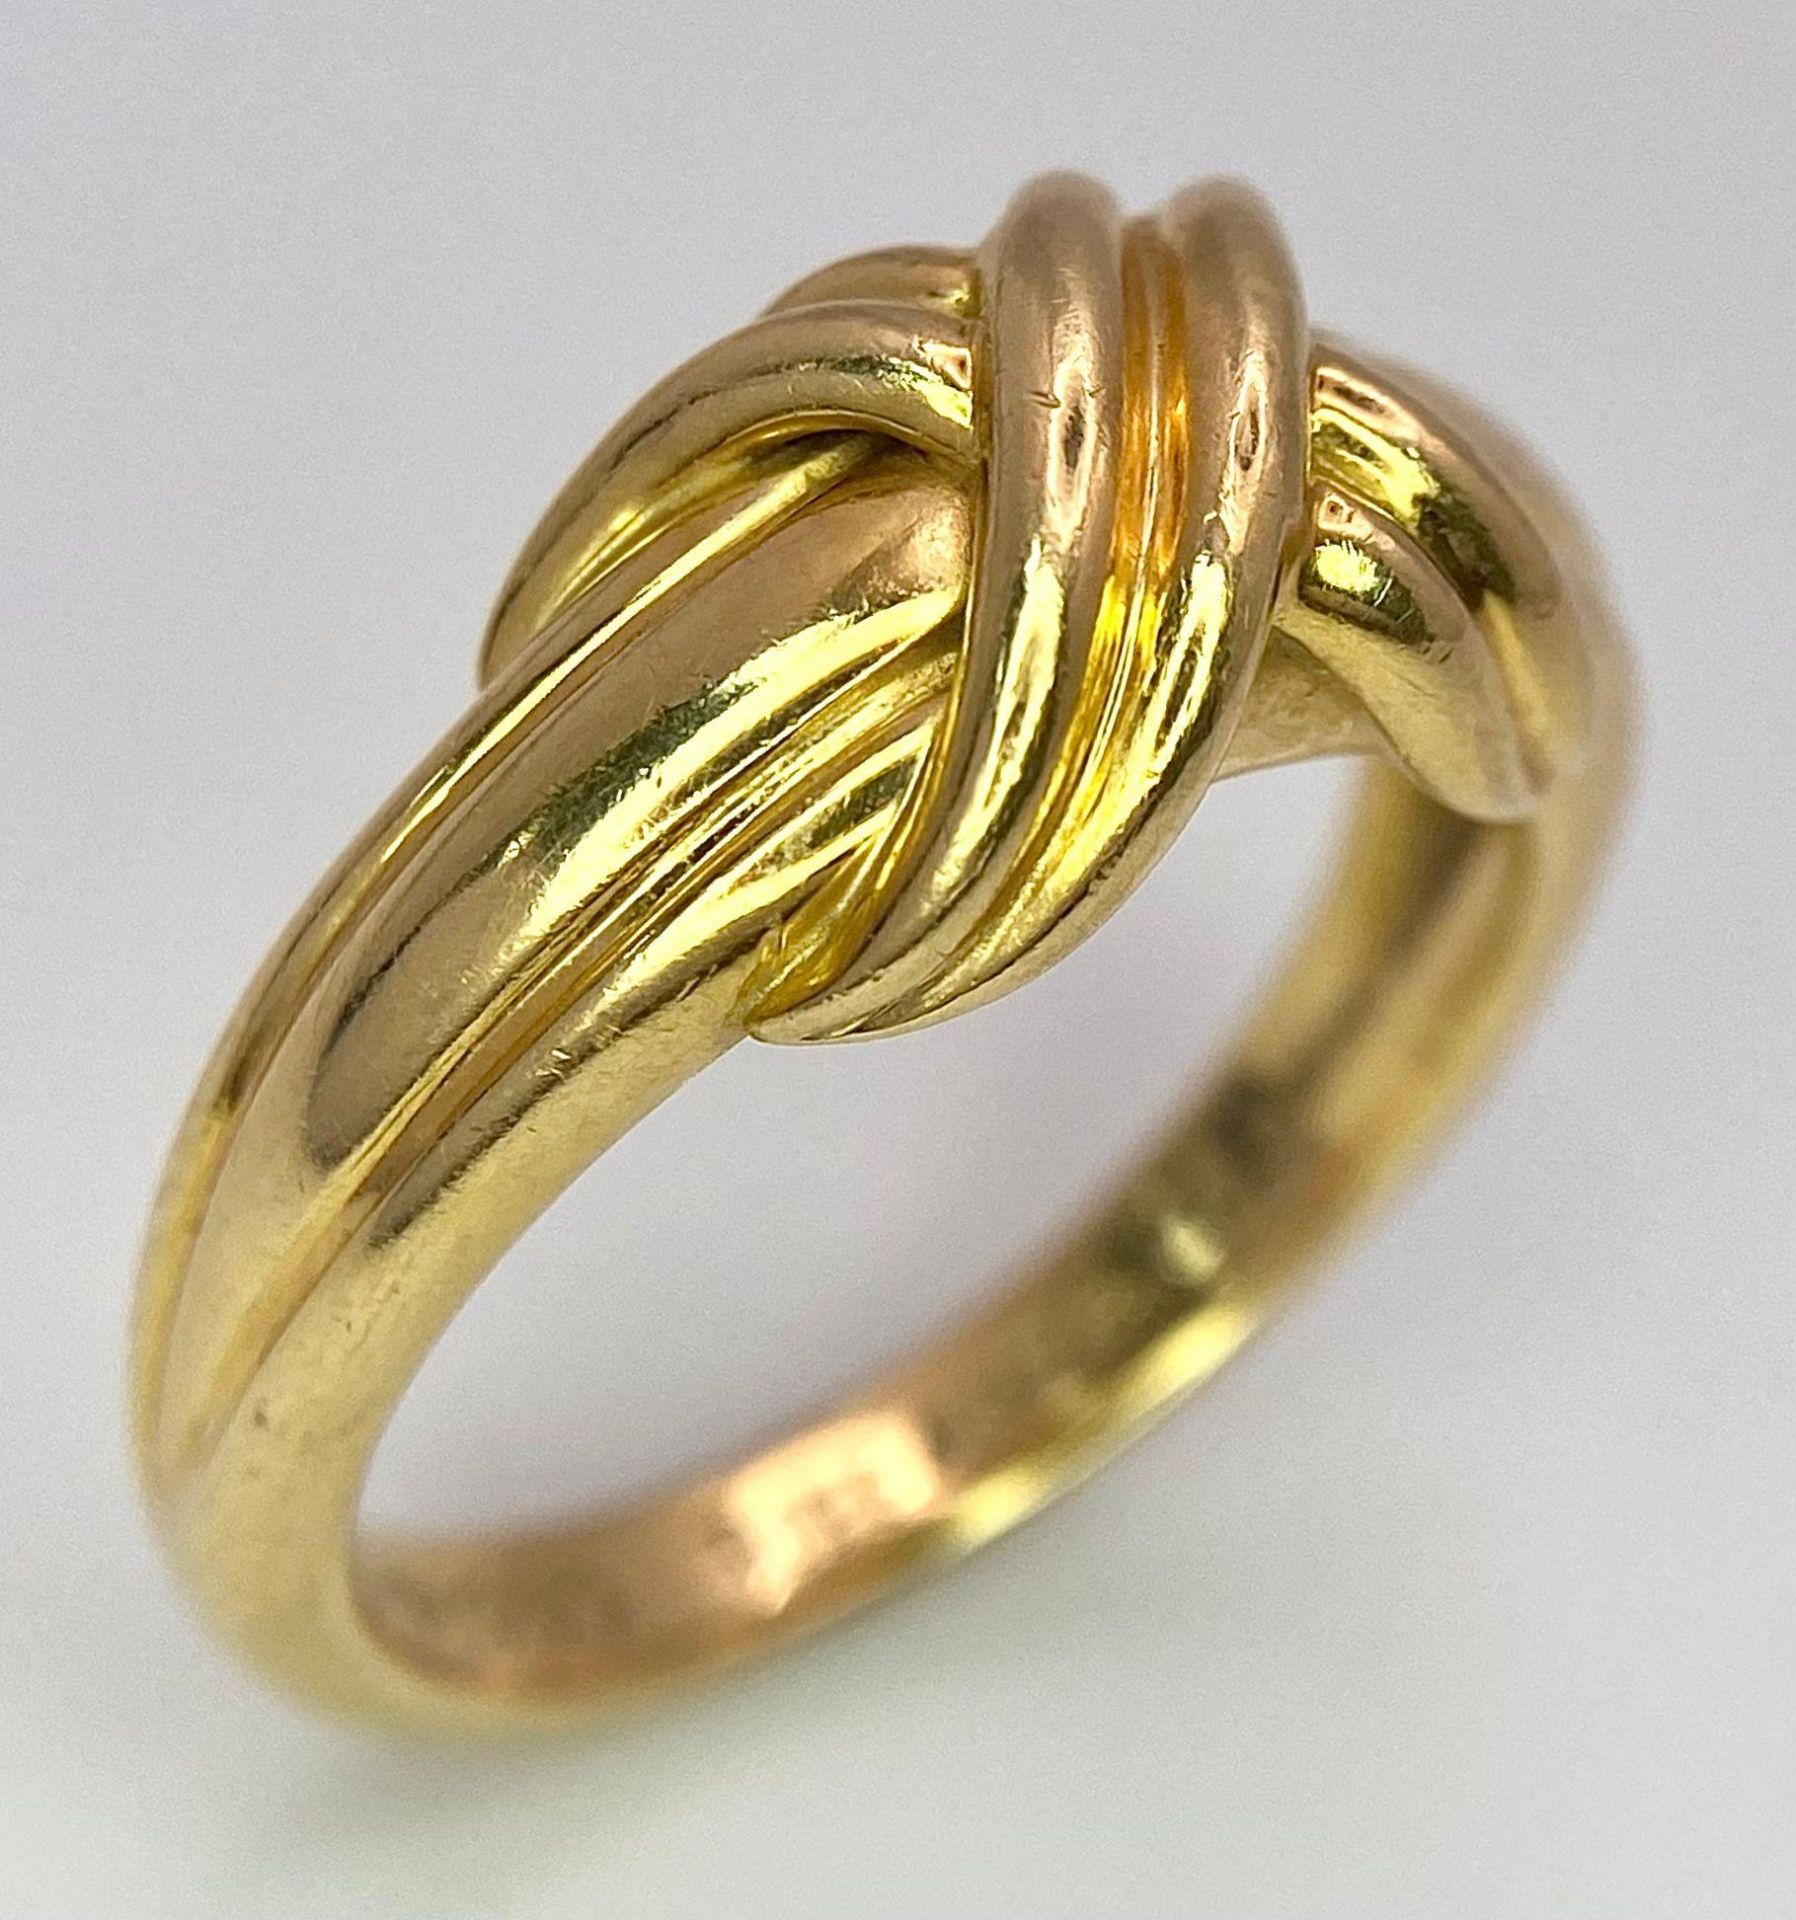 A Beautiful Tiffany and Co. 18K Gold Love Ring. Tiffany and co. markings. Size N. 7.2g weight.